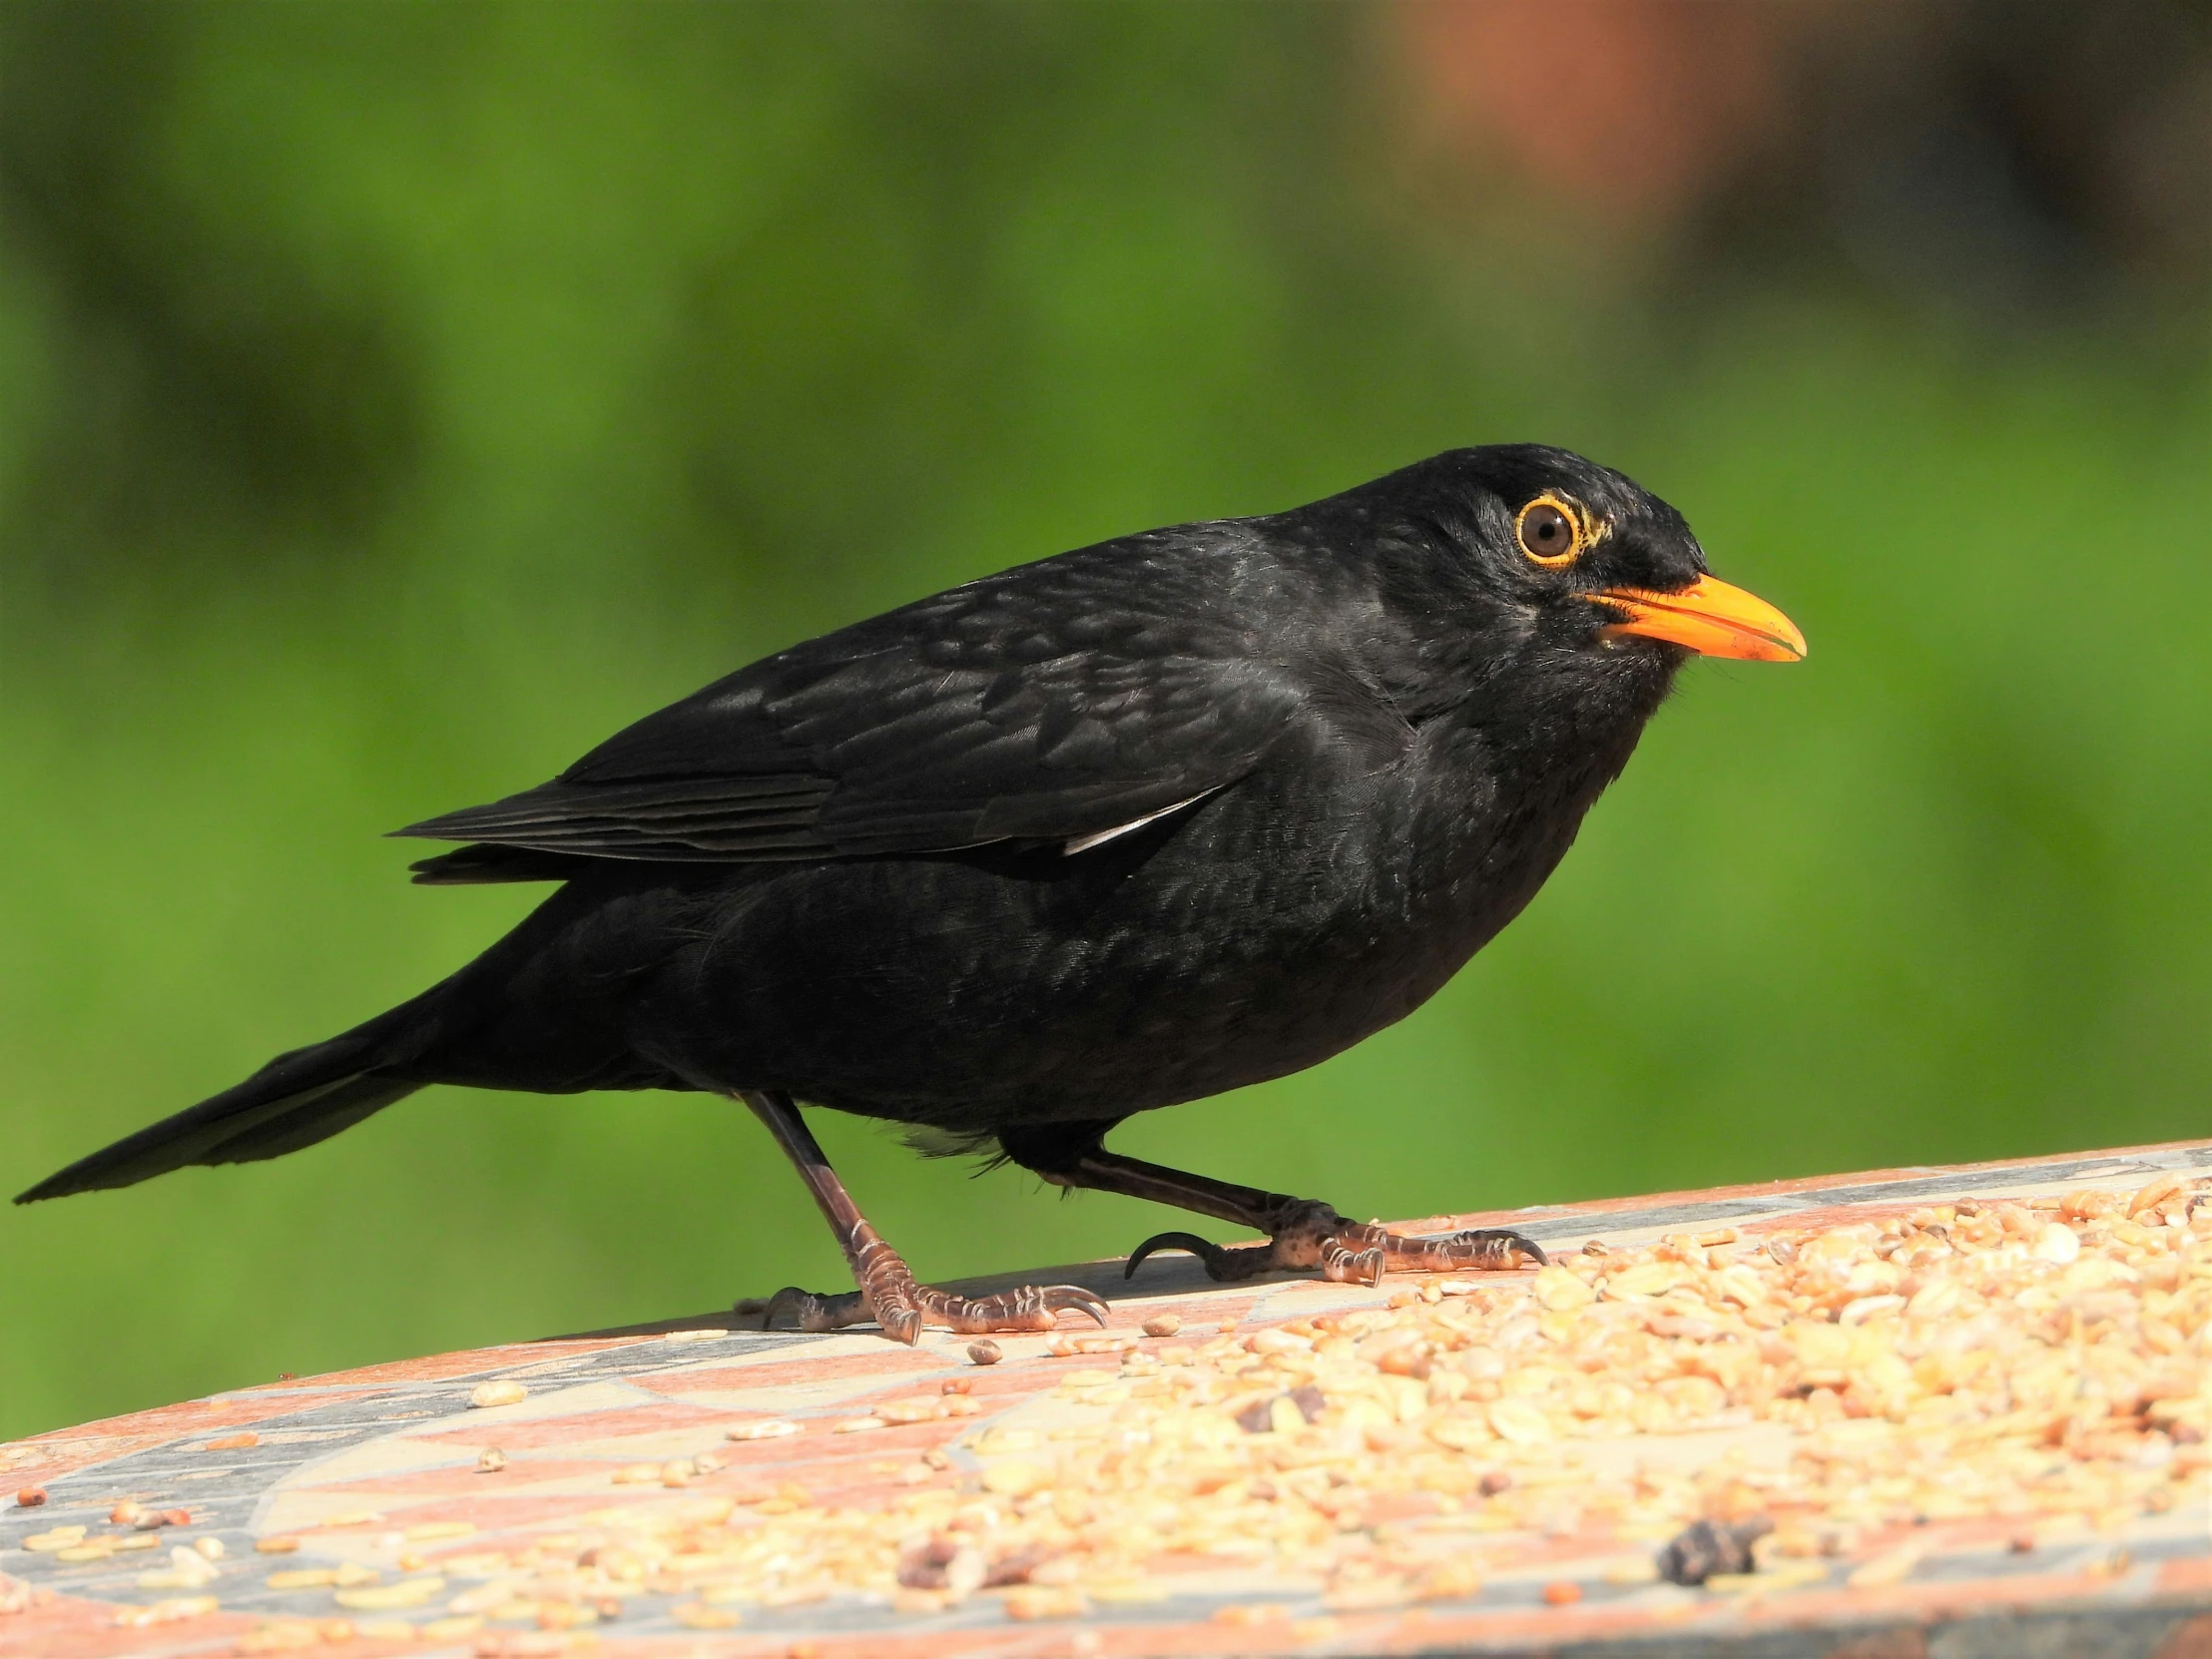 a small black bird sitting on top of a wooden table